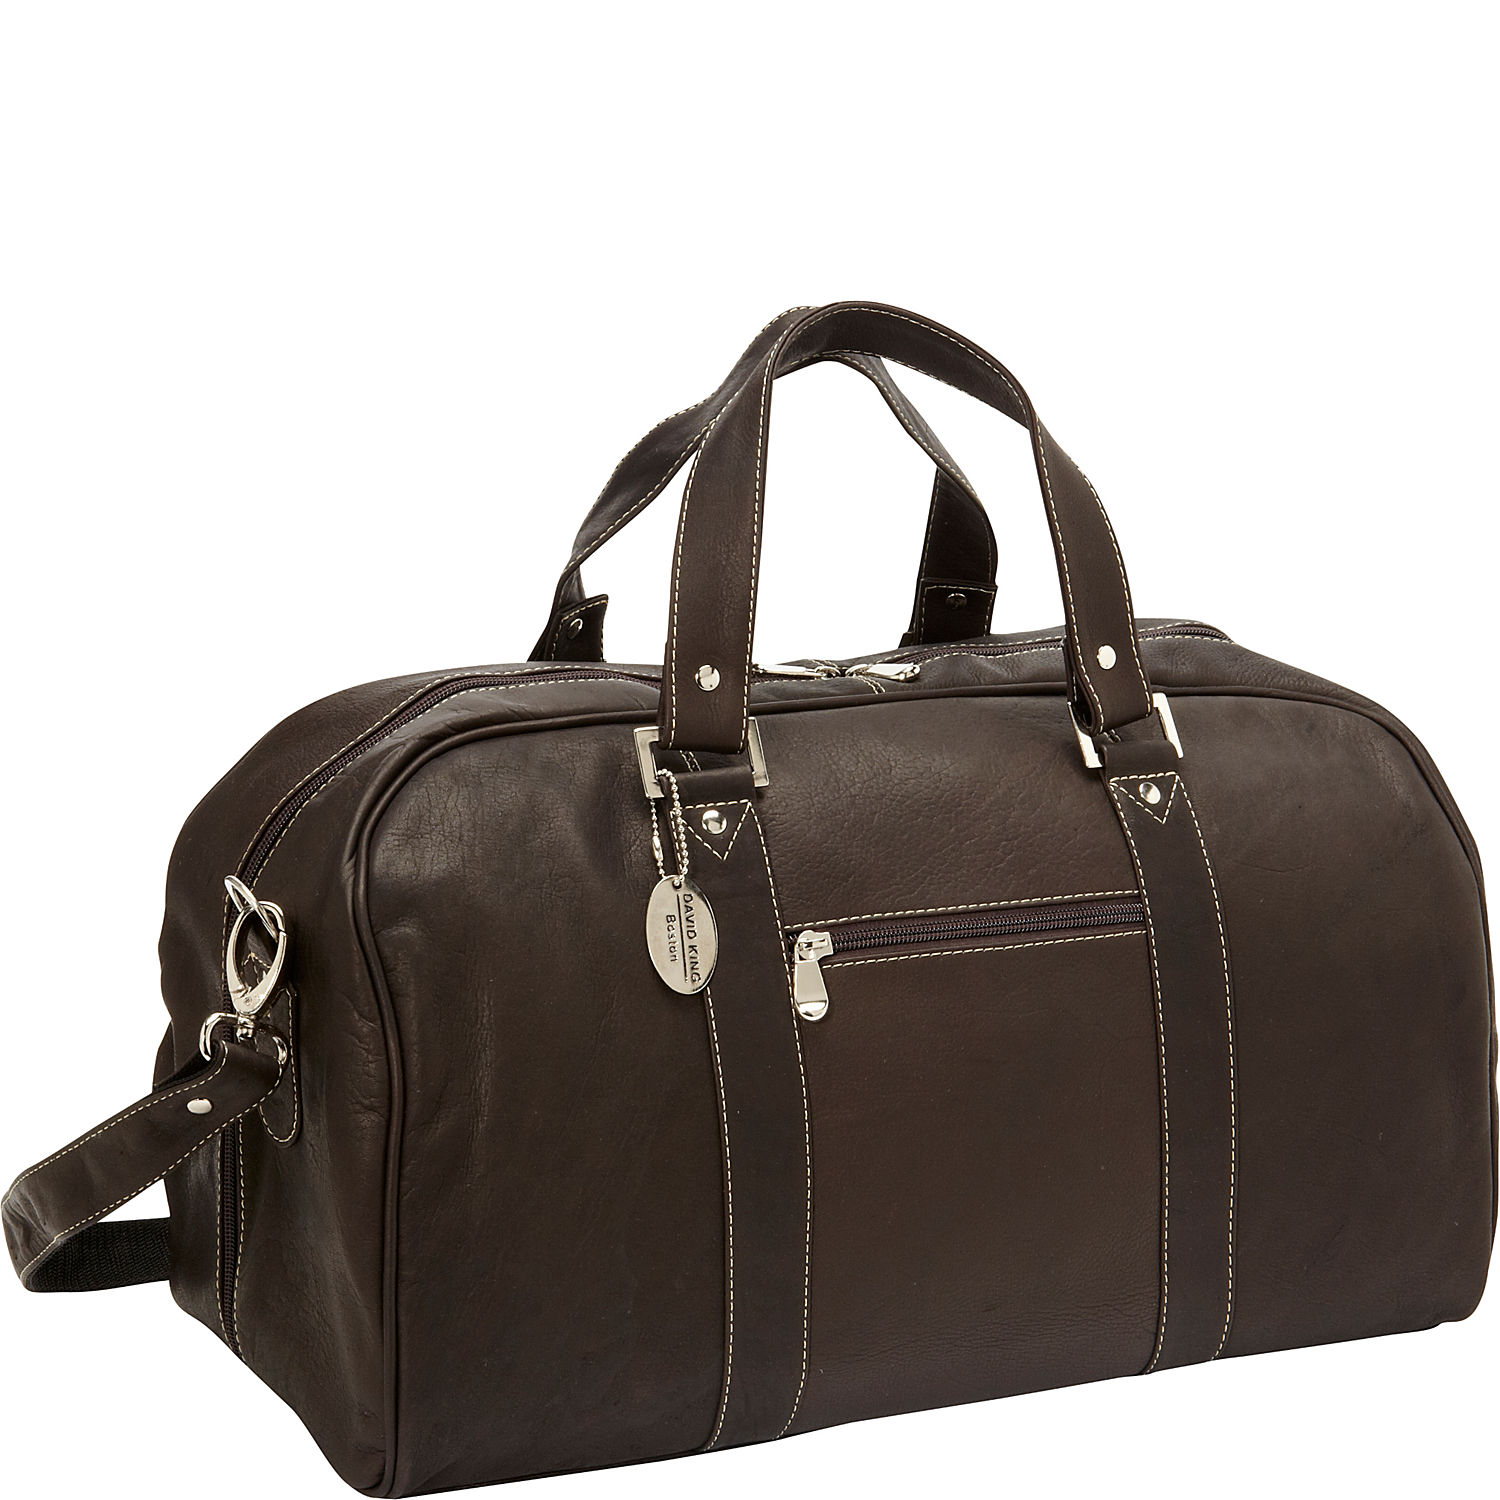 David King Leather 8308 Deluxe a Frame Duffel Cafe | eBay